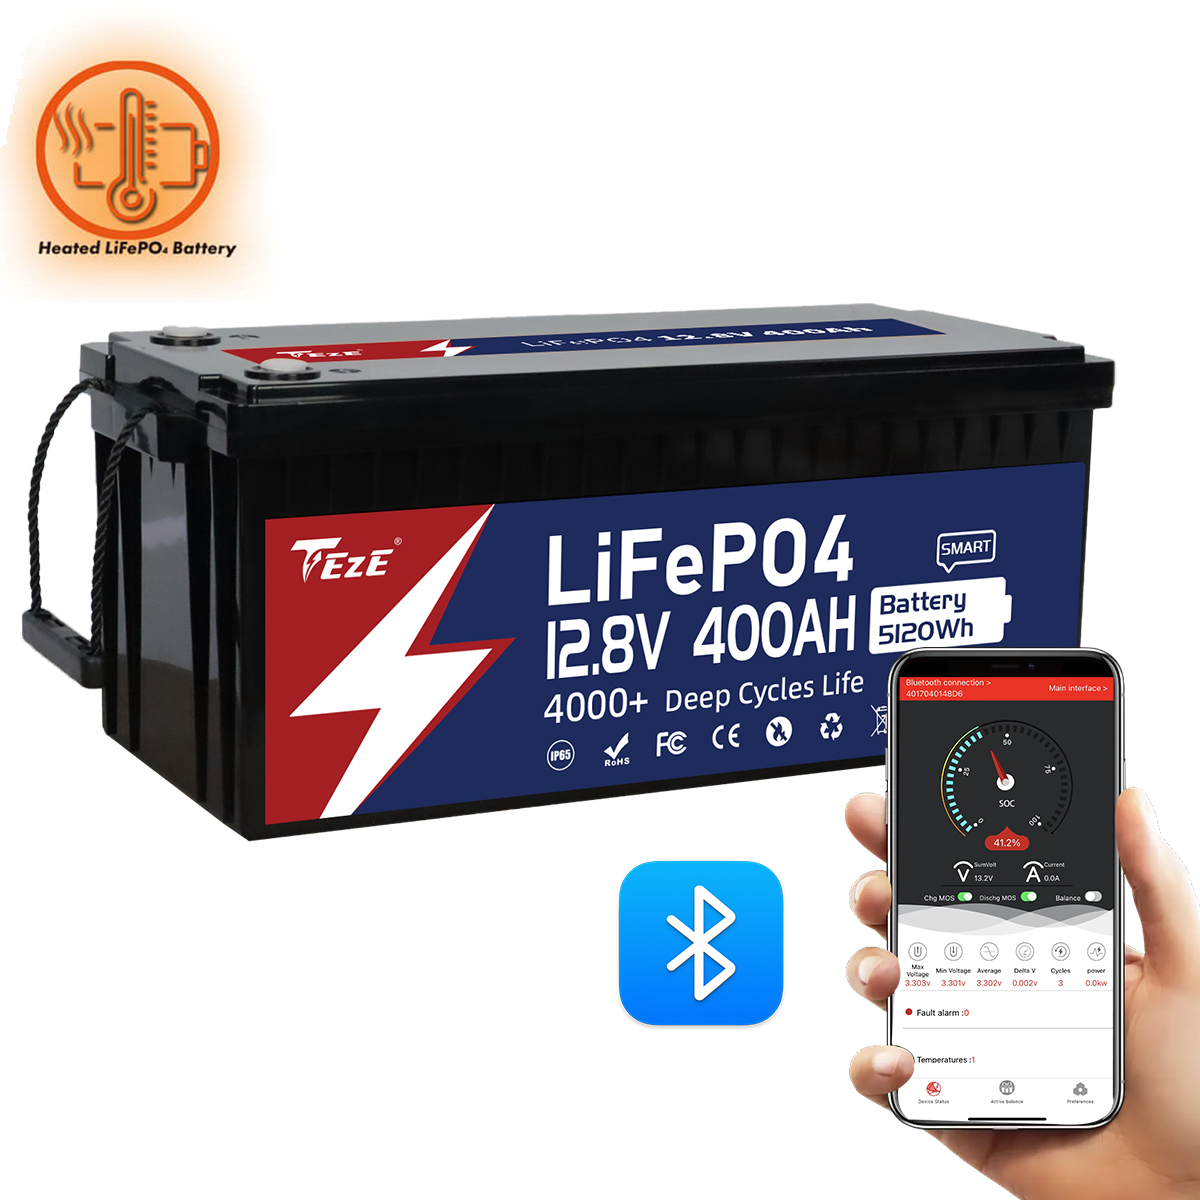 TezePower 12V 400Ah LiFePO4 Battery with Bluetooth, Self-heating and Active Balancer, Built-in 250A Daly BMS(Bluetooth Built-in Version)-TezePower